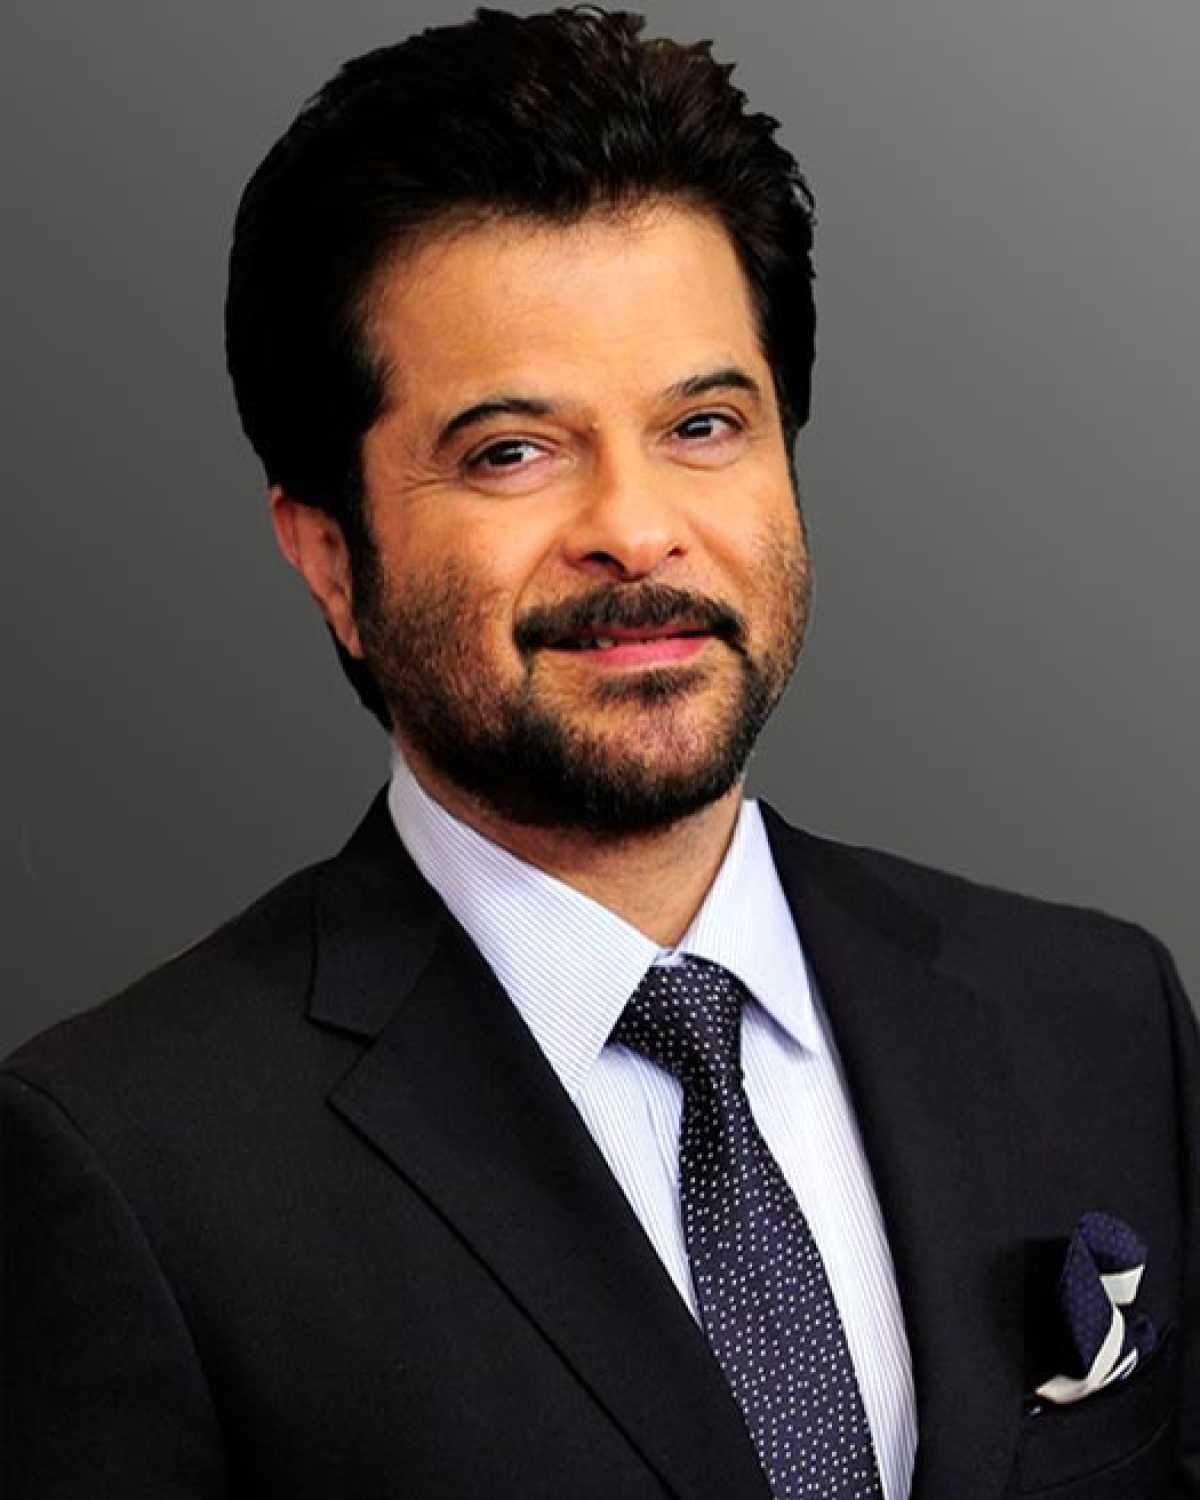 Anil Kapoor photo and image